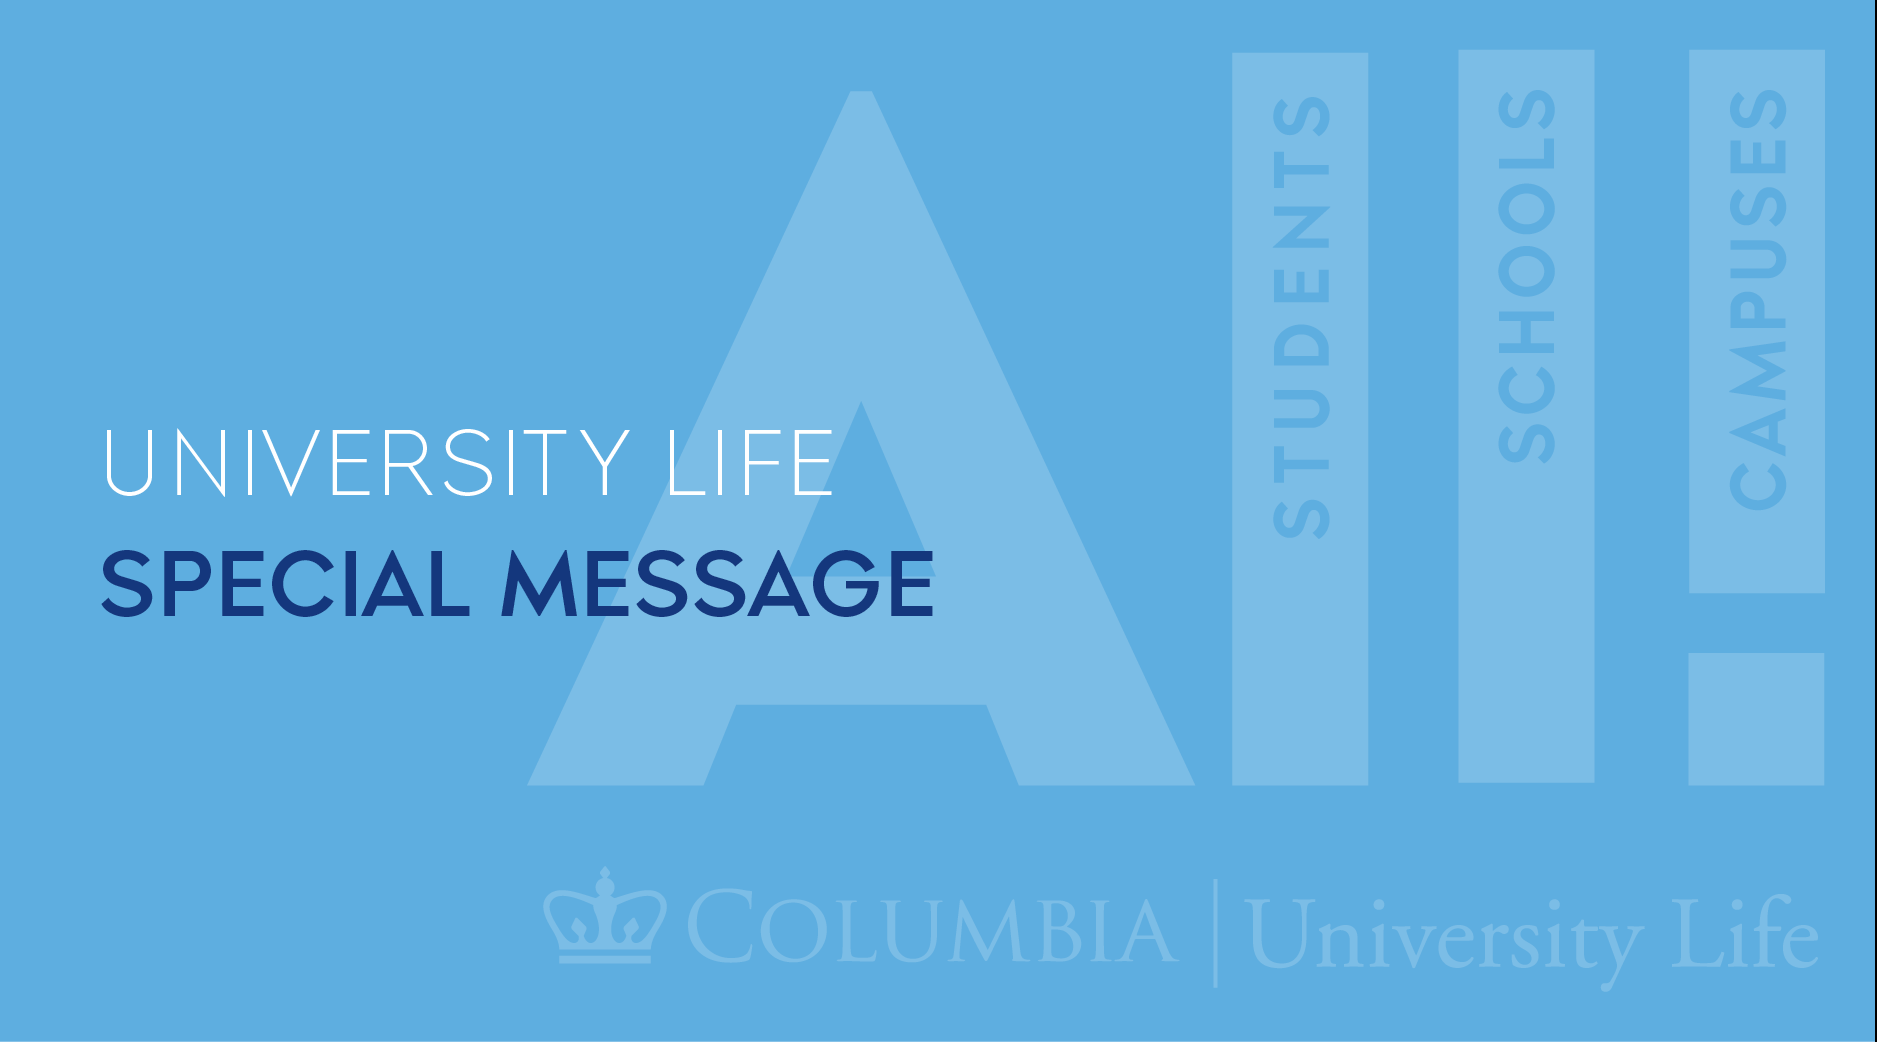 University Life
Special Message
ALL!